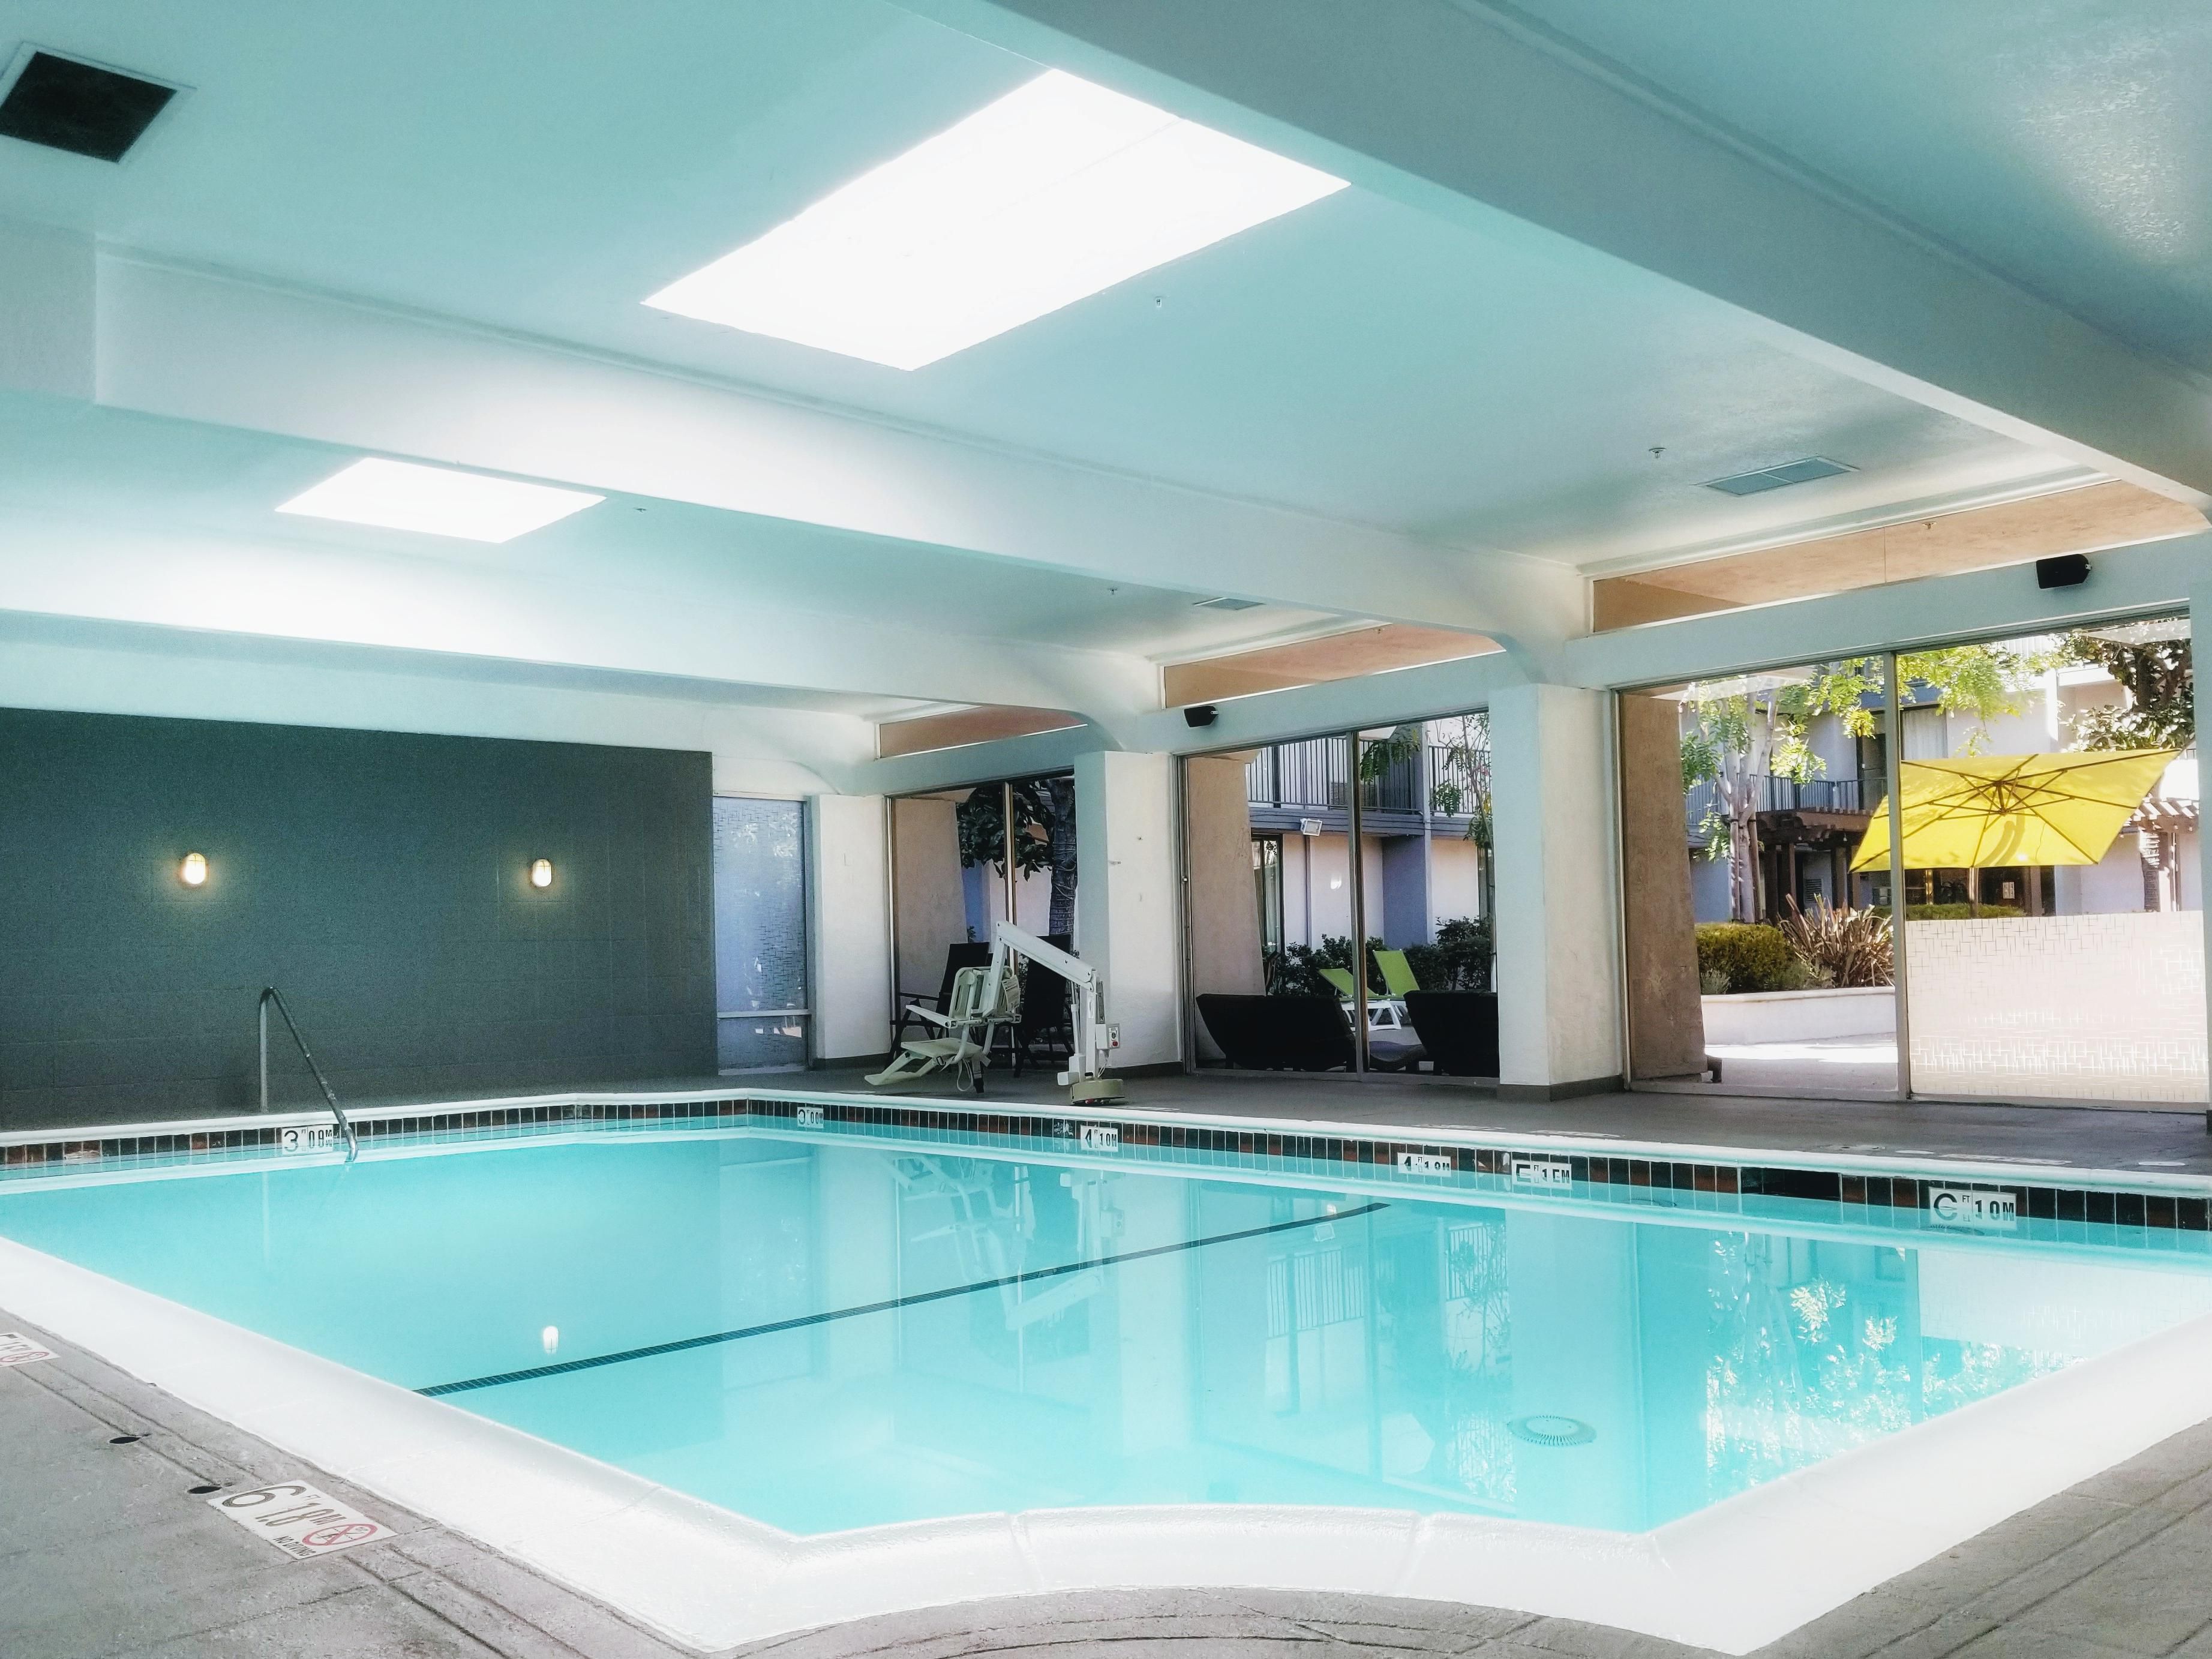 Enjoy our indoor heated pool open all year round.  